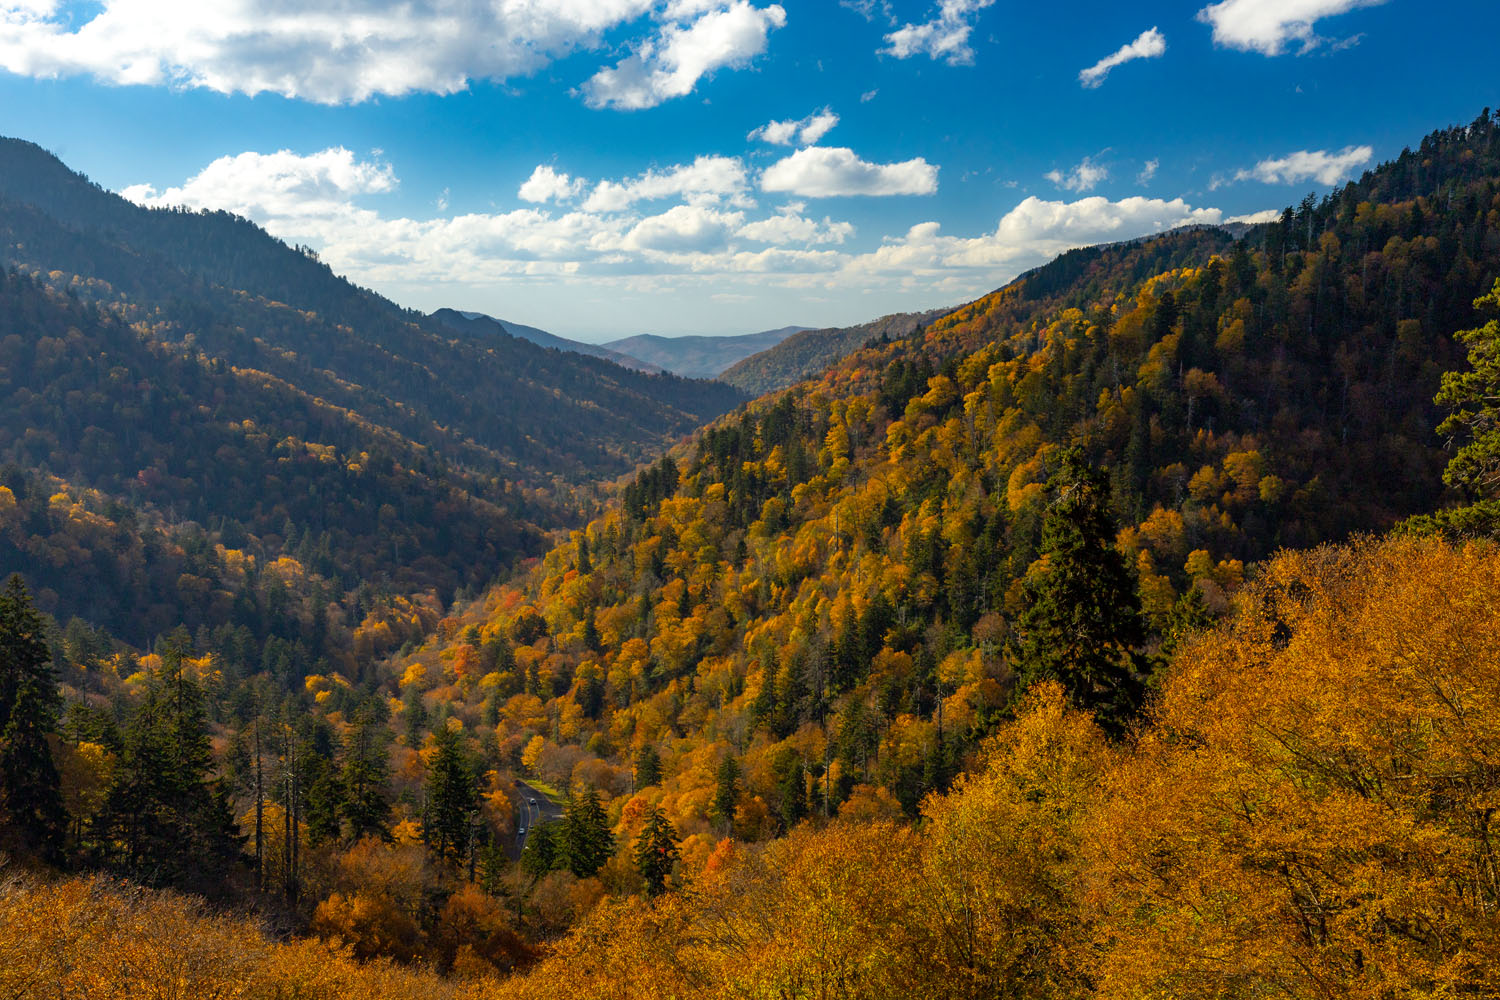 Fall's autumn colors paint the mountainsides below Morton's Overlook.